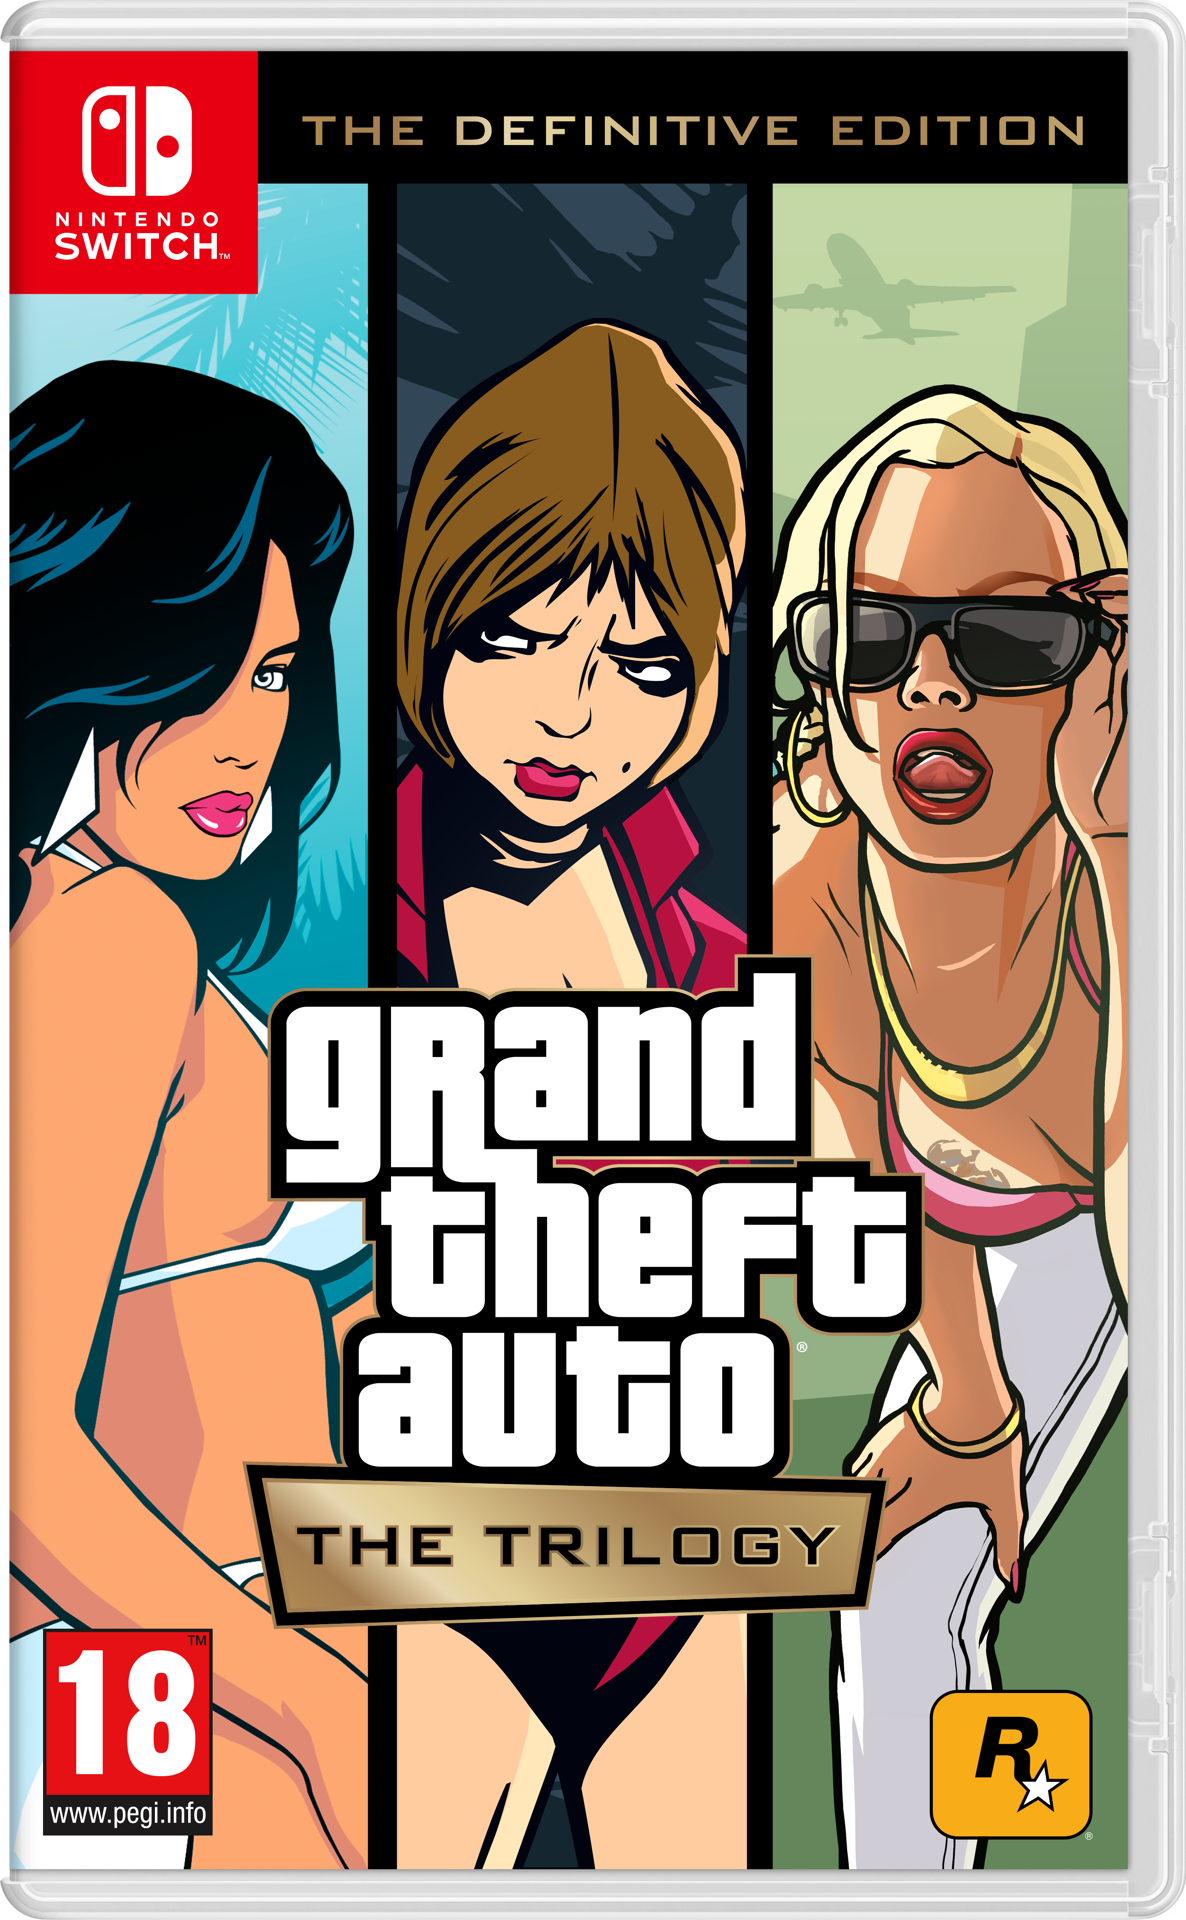 GTA (Grand Theft Auto) : The Trilogy - The Definitive Edition